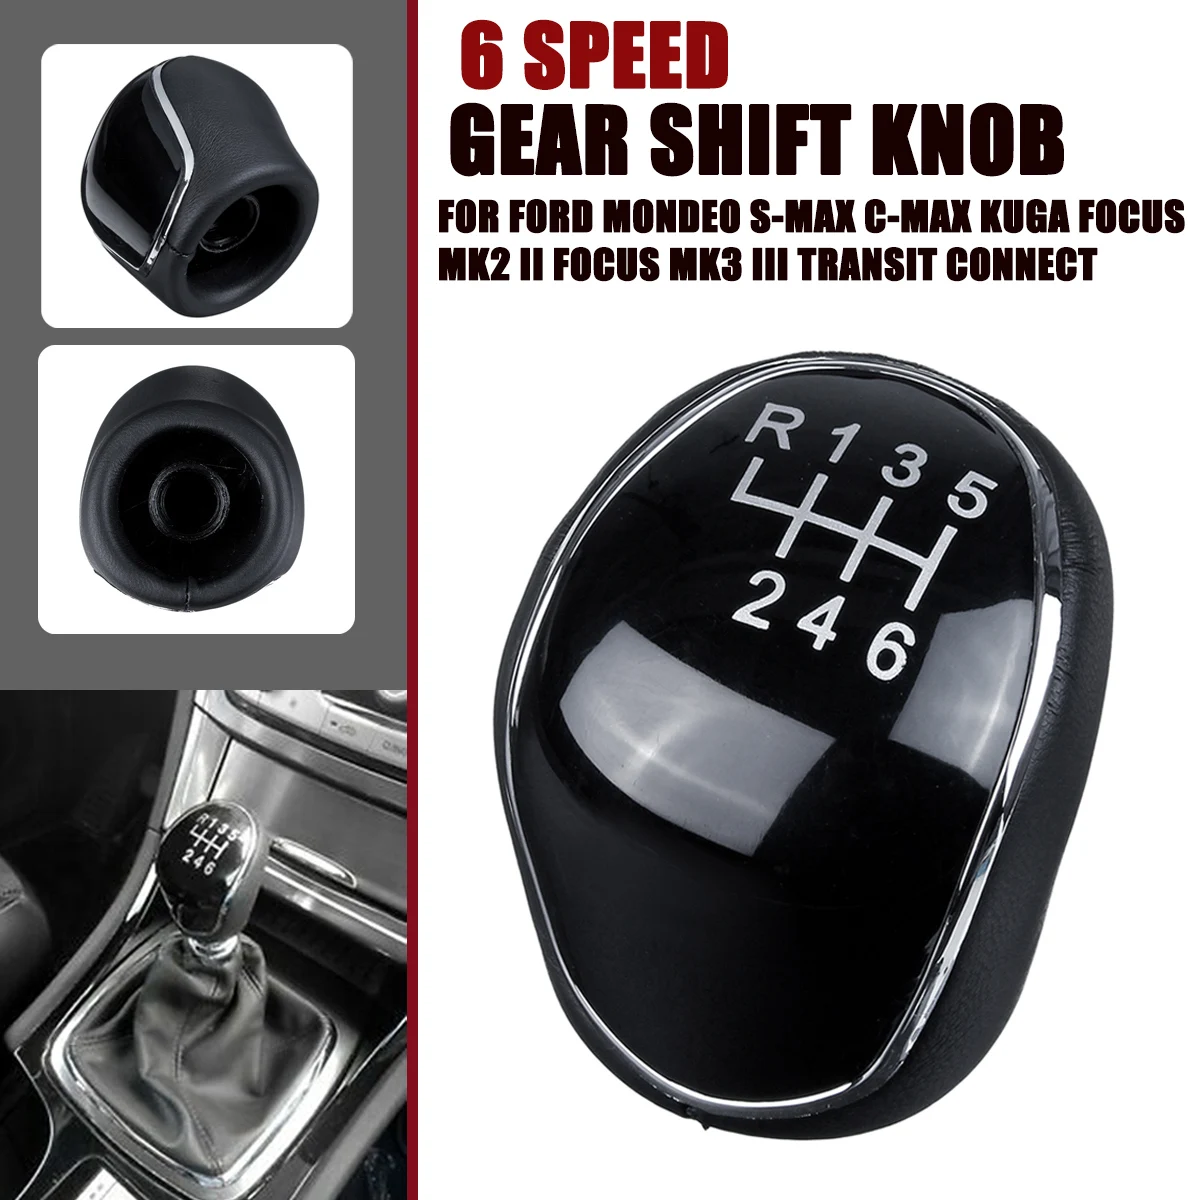 

6 Speed Gear Stick Knob Head Lever leather Car Adapter Replacement for Ford Mondeo IV Focus MK2 MK3 C-MAX Kuga Car Accessories